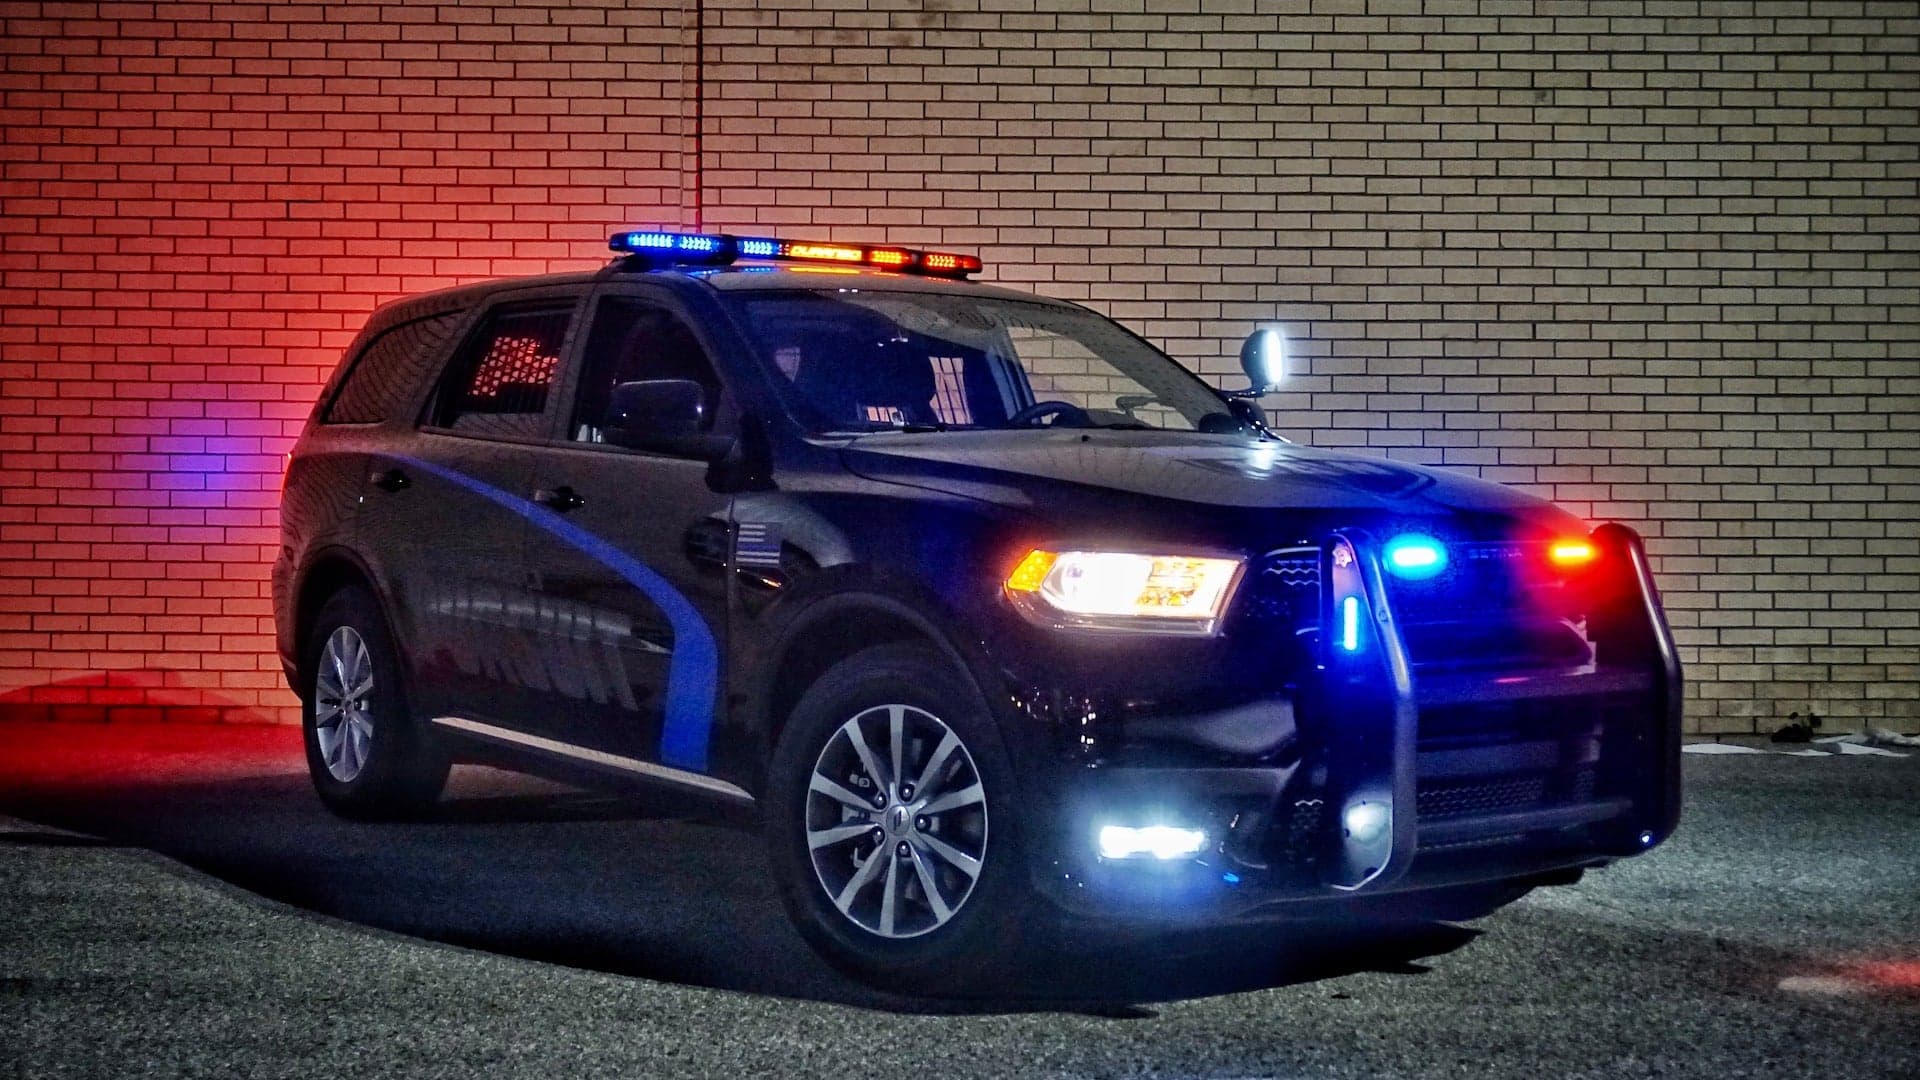 2020 Dodge Durango Pursuit Review: Driving a Police Car Will Teach You a Lot About People